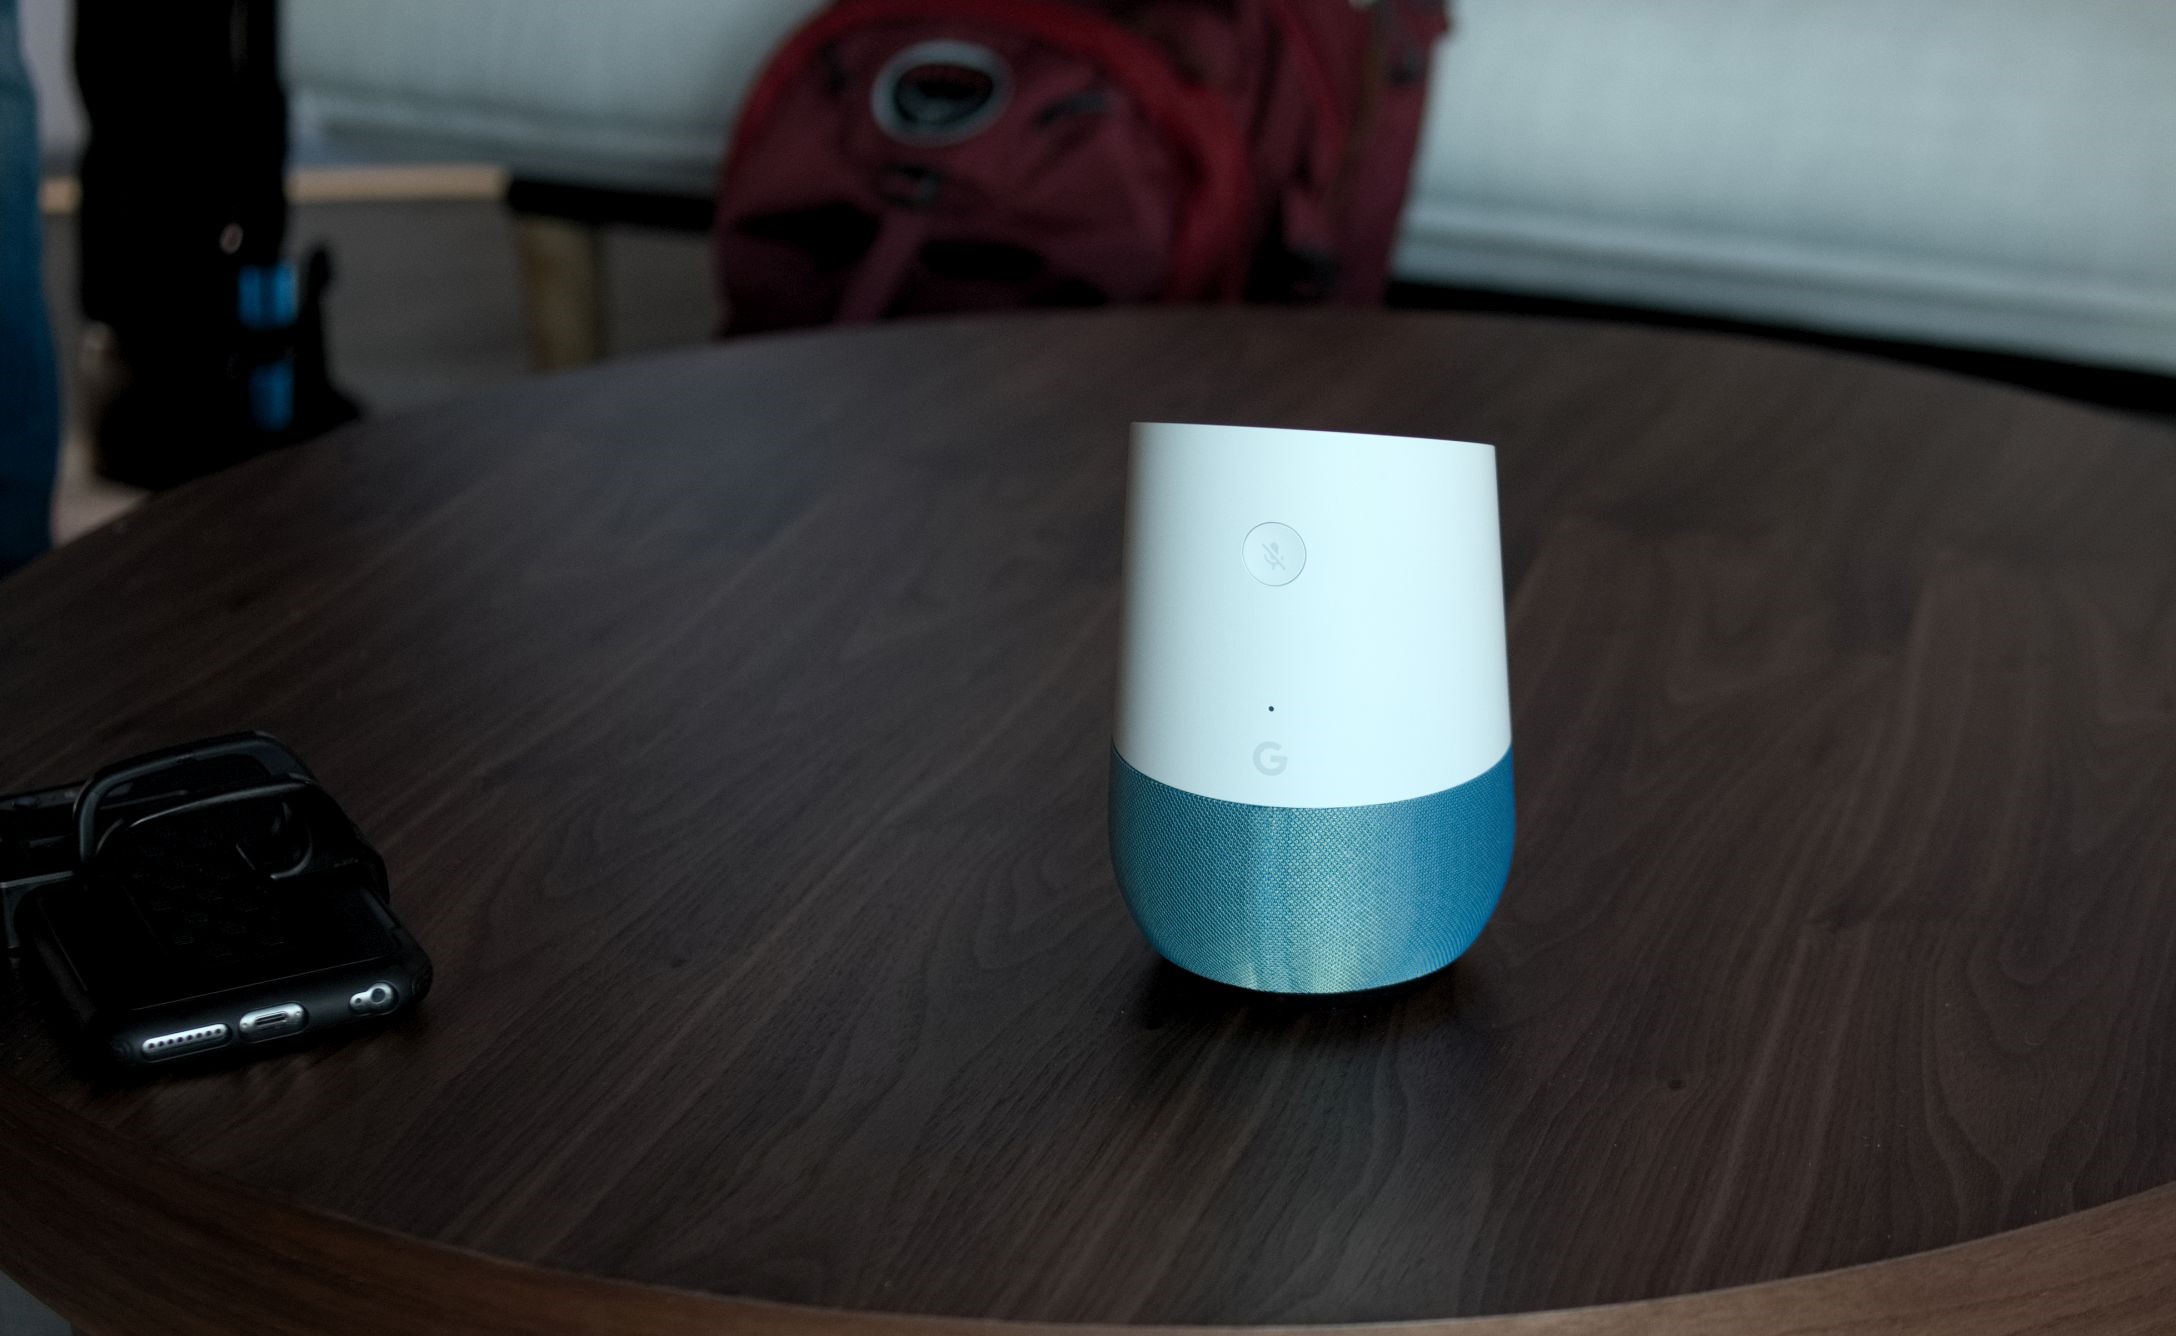 When Did Google Home Come Out